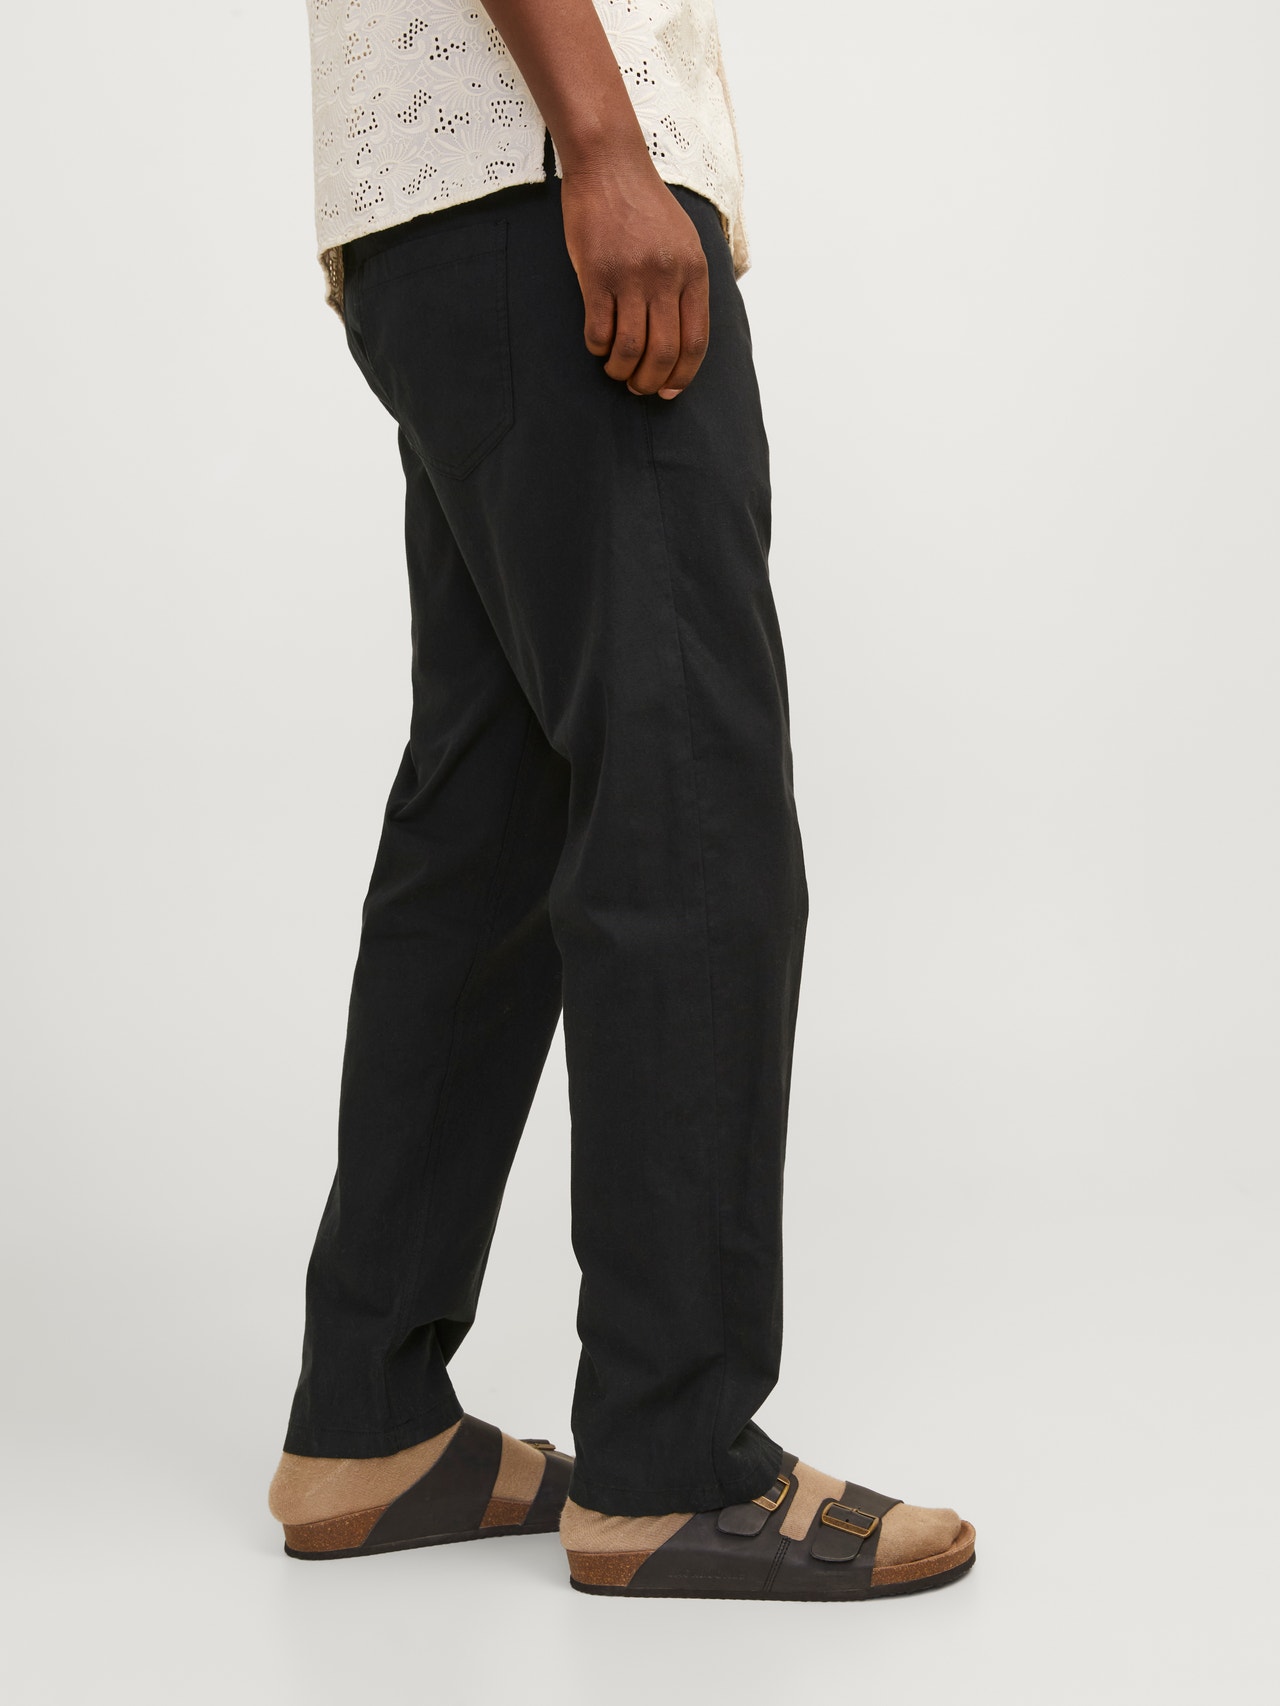 Jack & Jones Relaxed Fit Chino pants -Black - 12248606